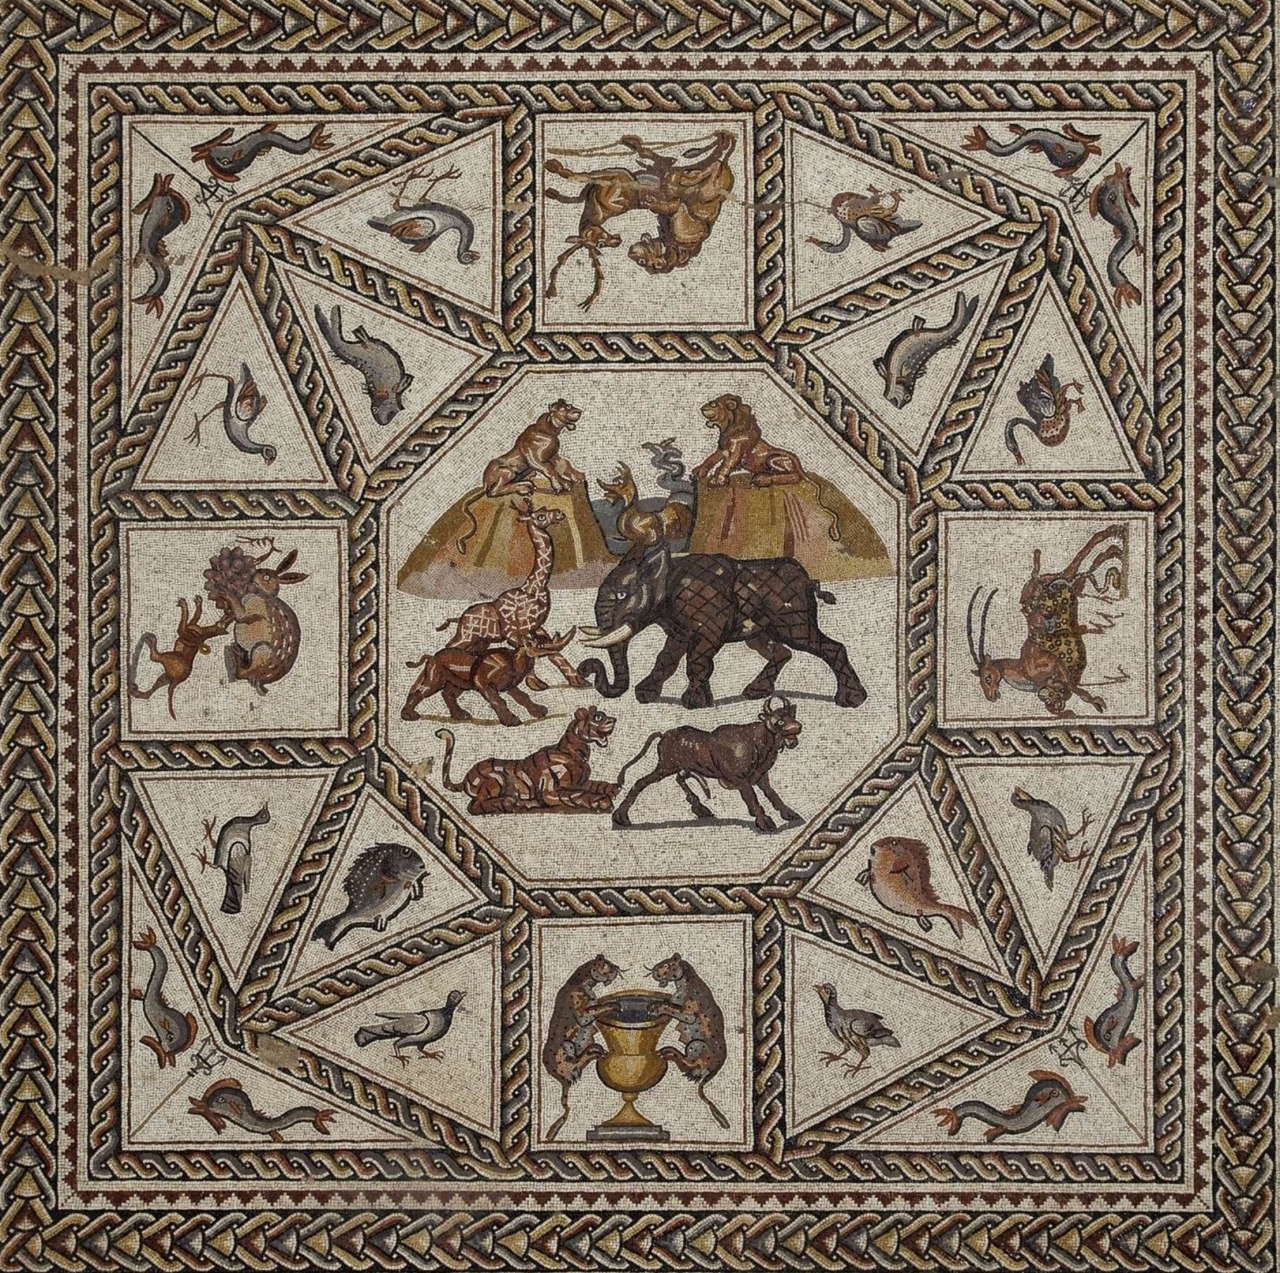 The Lod Mosaic. Israeli town of Lod. Dating to around AD 300.jpg